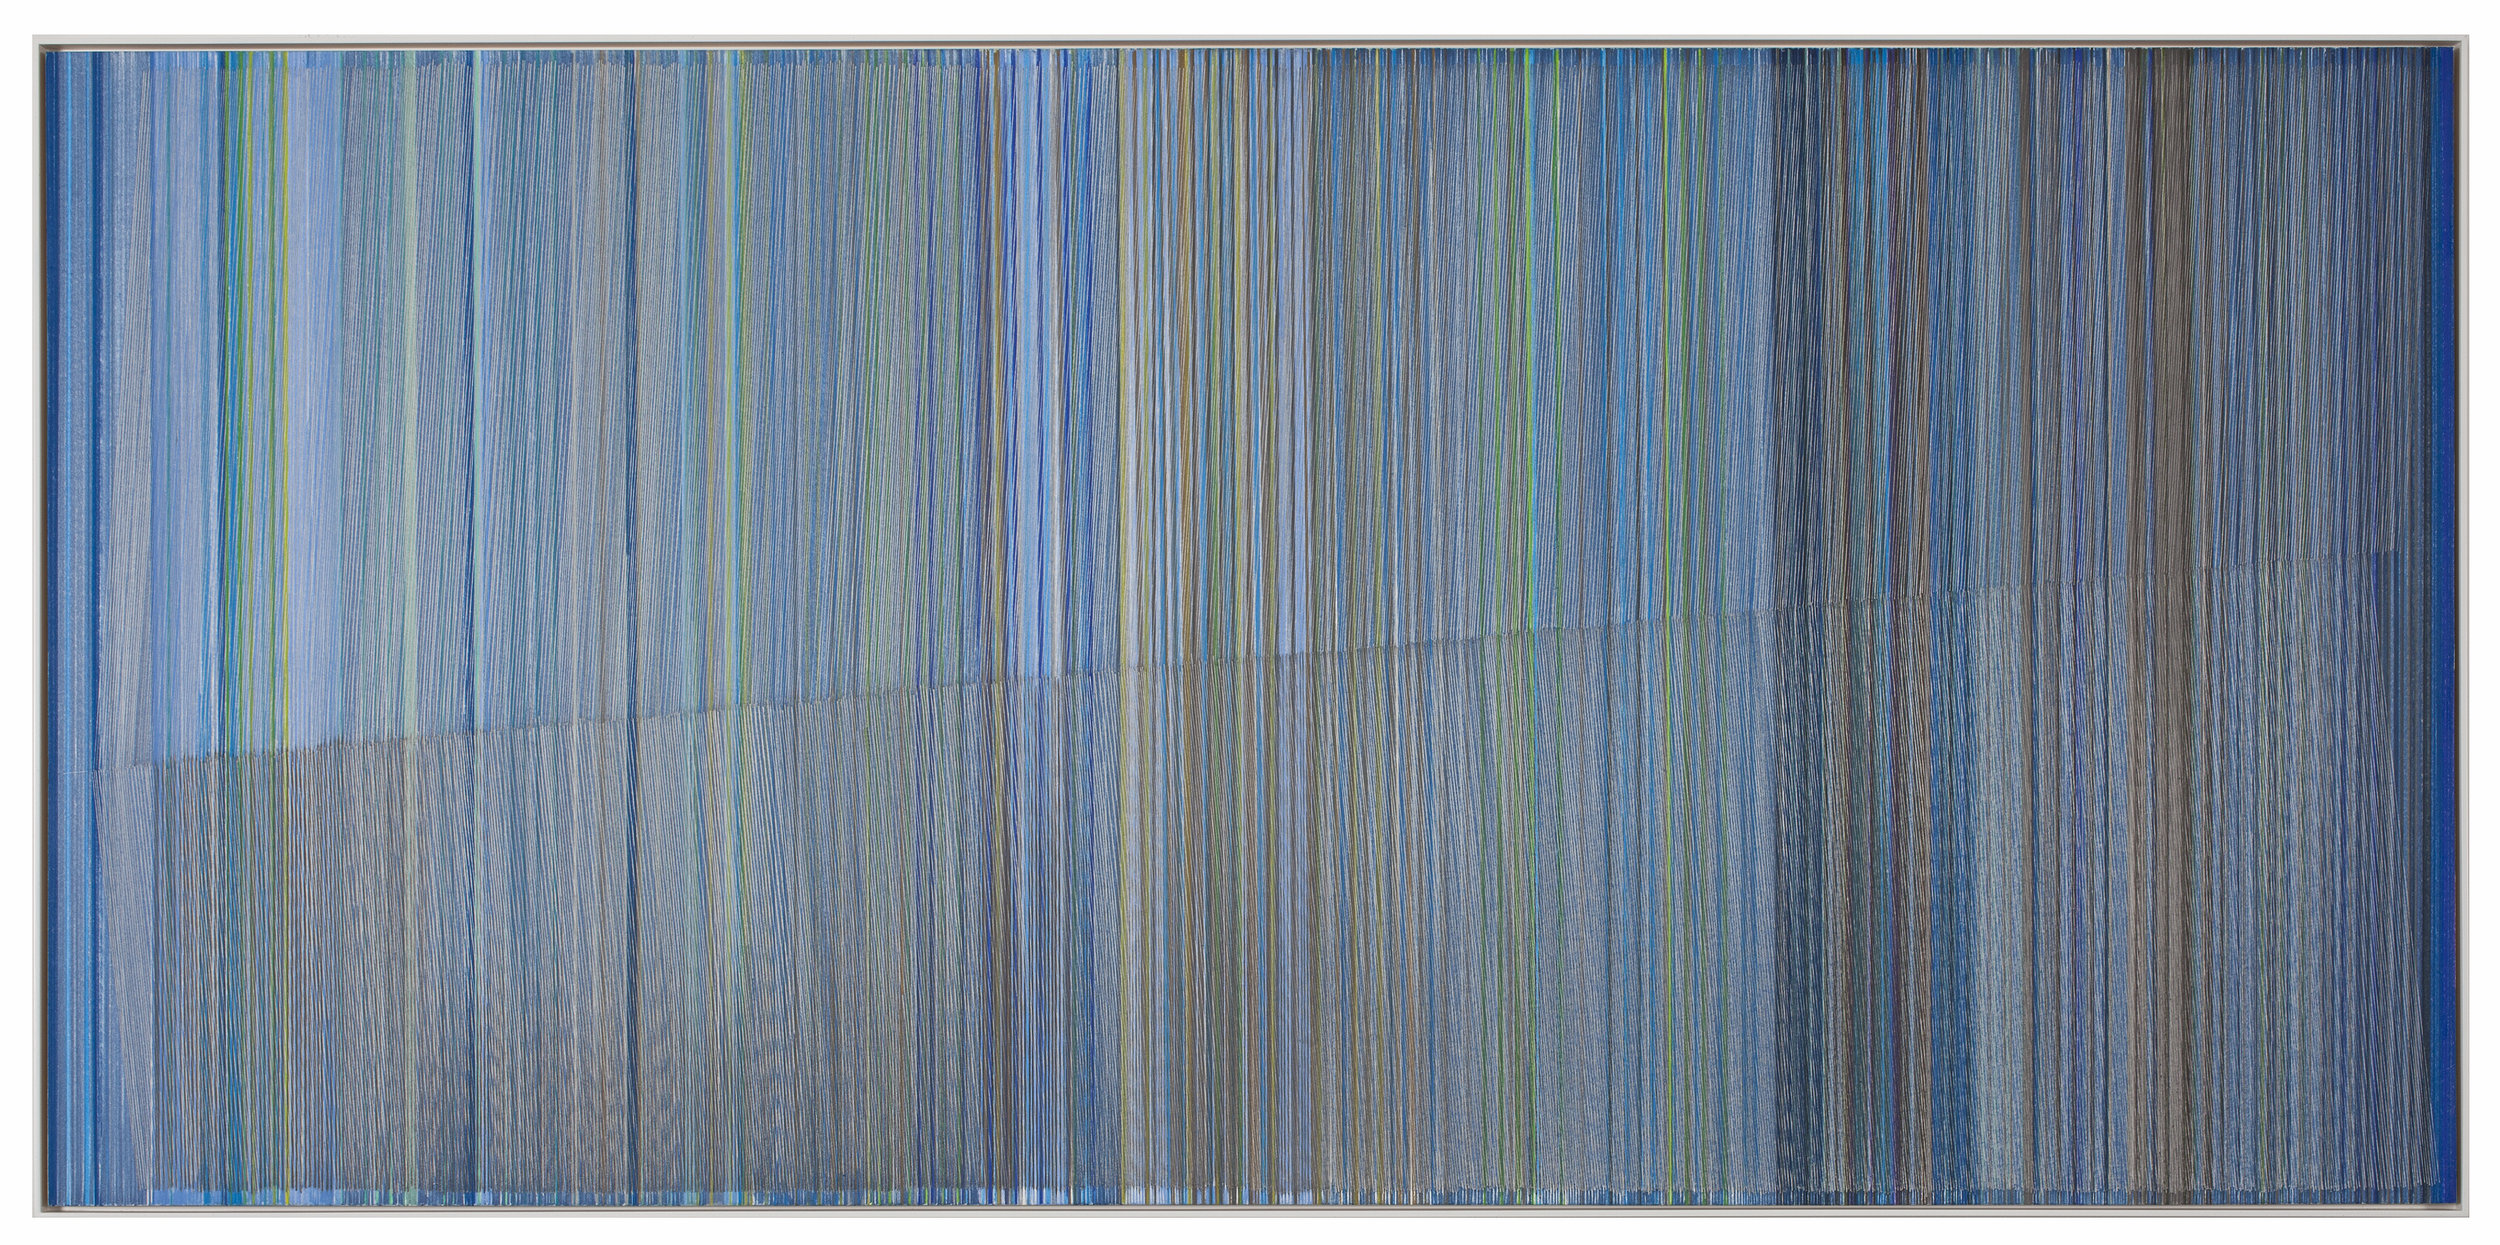    interminable present   2016 graphite and colored pencil on mat board 24 x 40 inches 